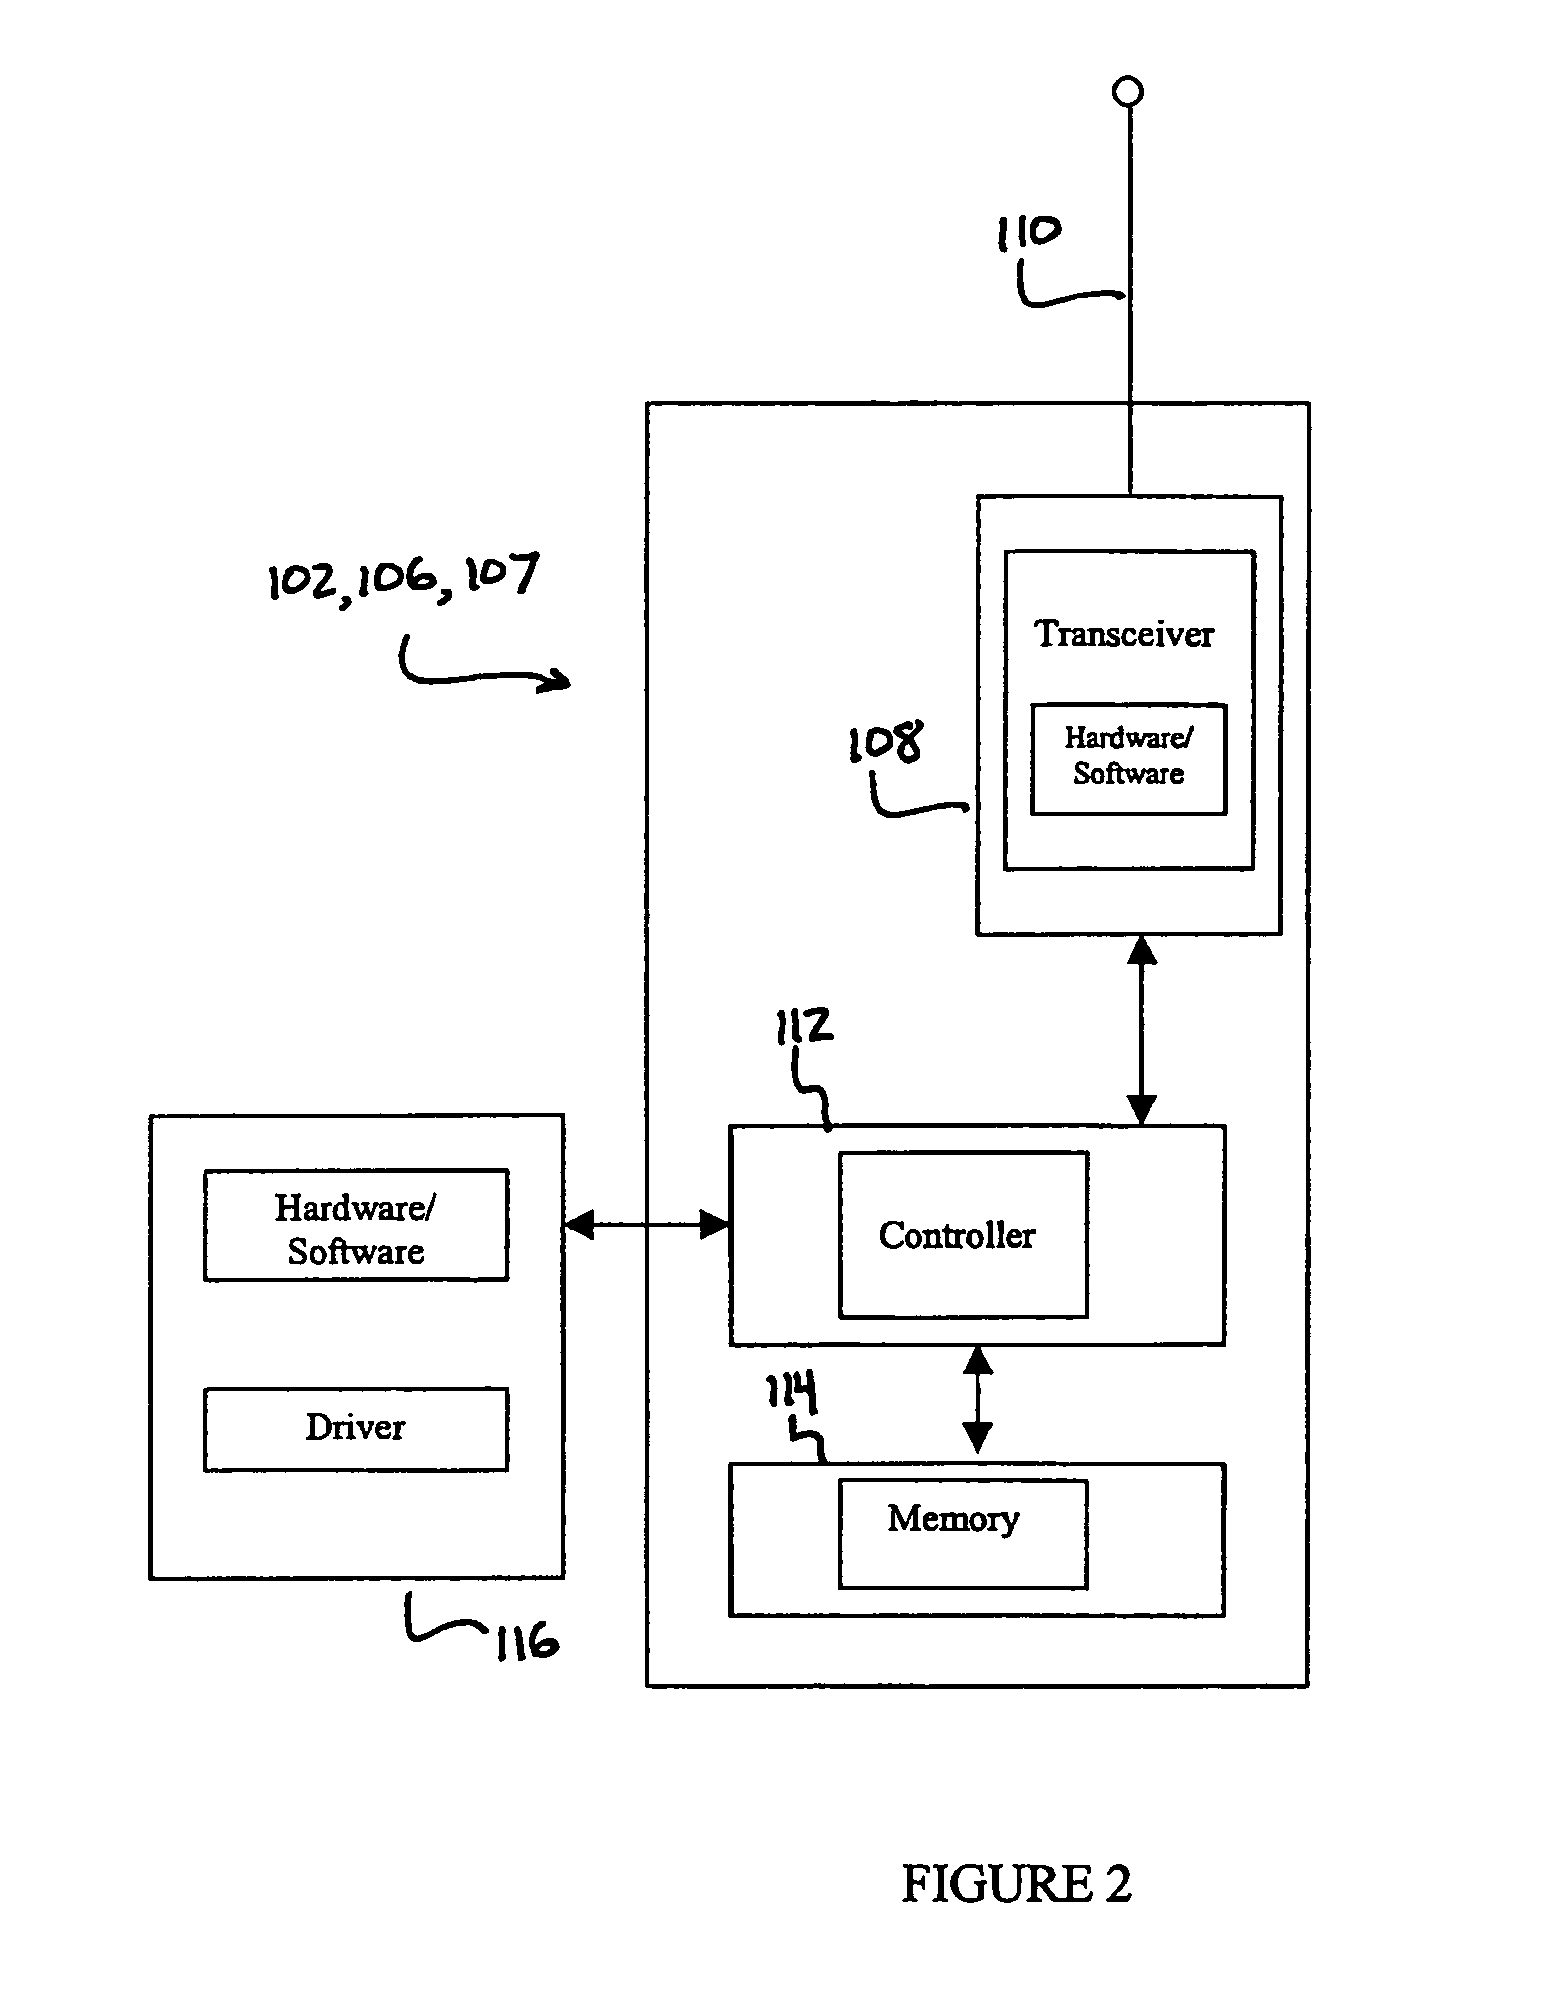 System and method to provide fairness and service differentation in ad-hoc networks